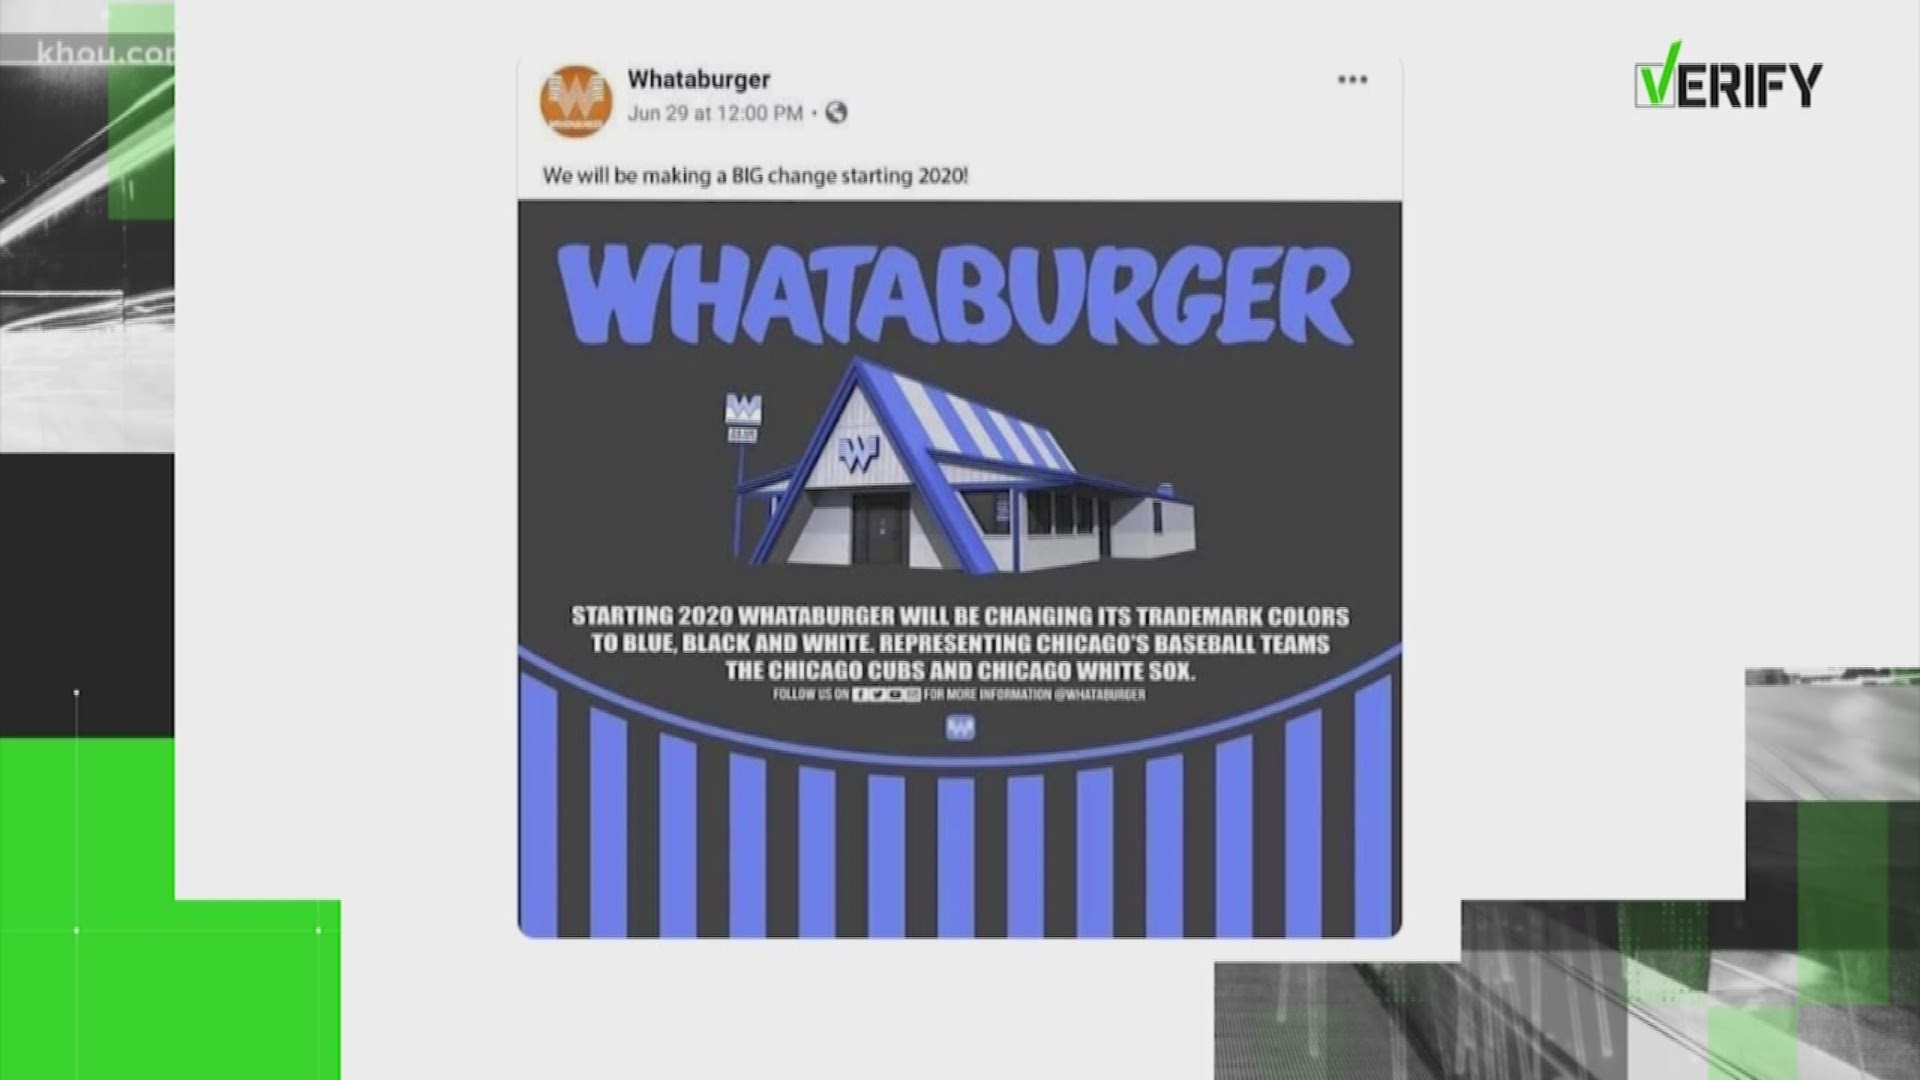 Do illegal immigrants really get benefits from our government? Say it ain’t so! Is Whataburger going black and blue to honor Chicago teams? Chris Rogers verifies.